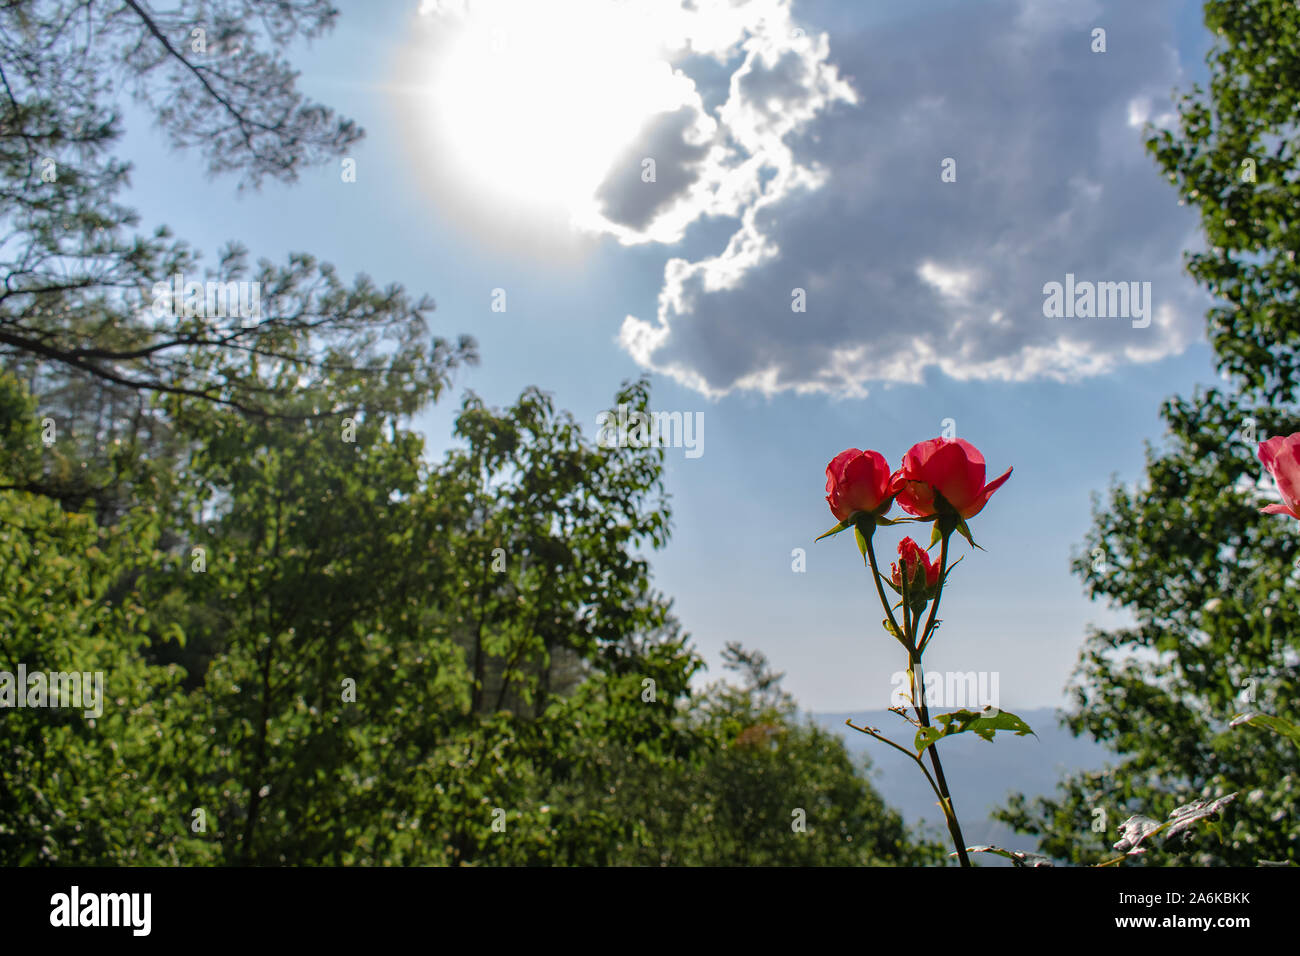 Red pink single flowers landscape with bright sun, clouds, and green trees leaves Stock Photo